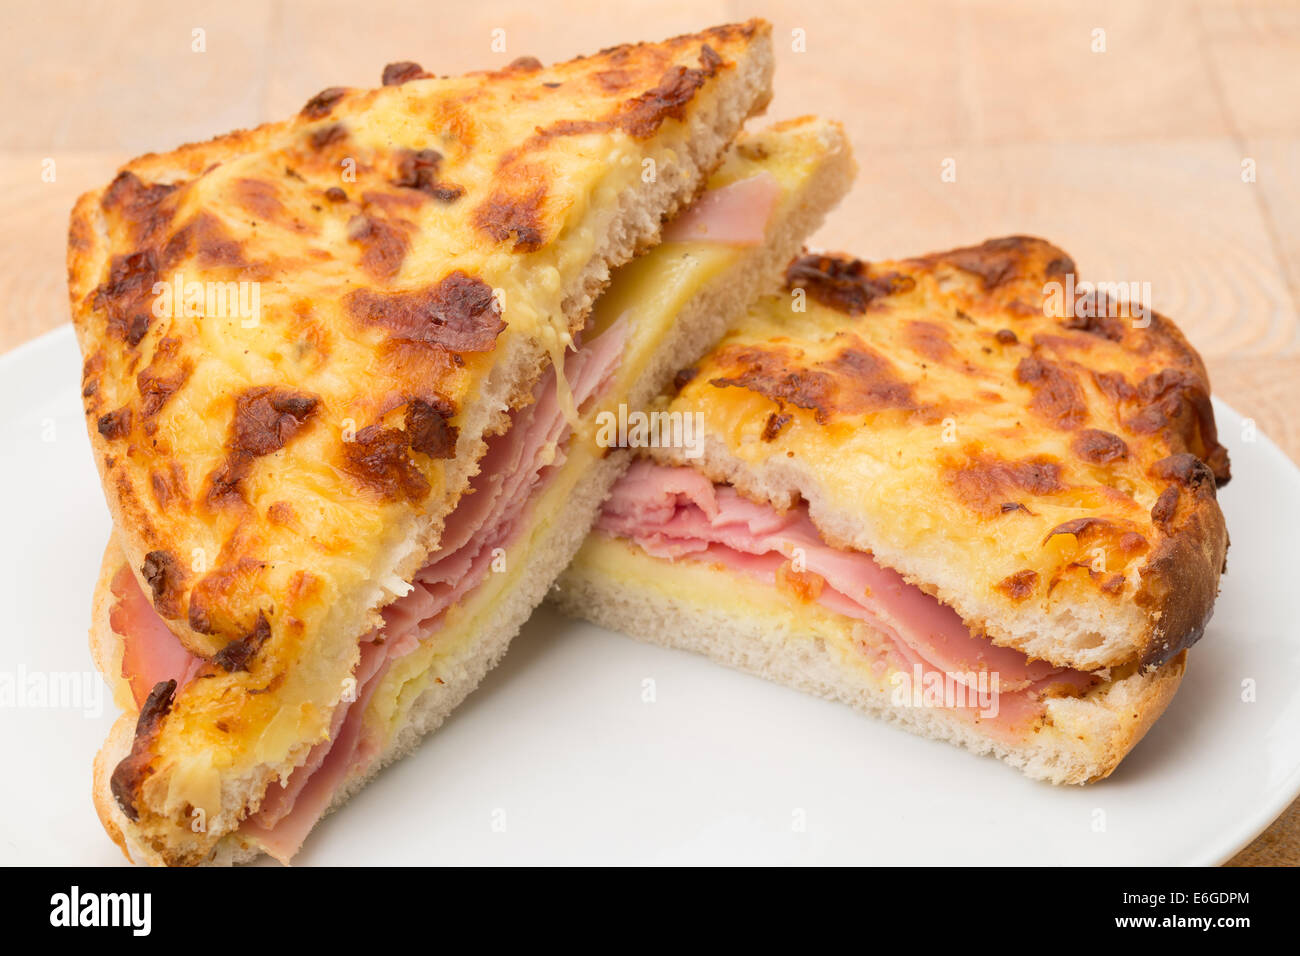 A toasted cheese and ham sandwich or panini - studio shot Stock Photo